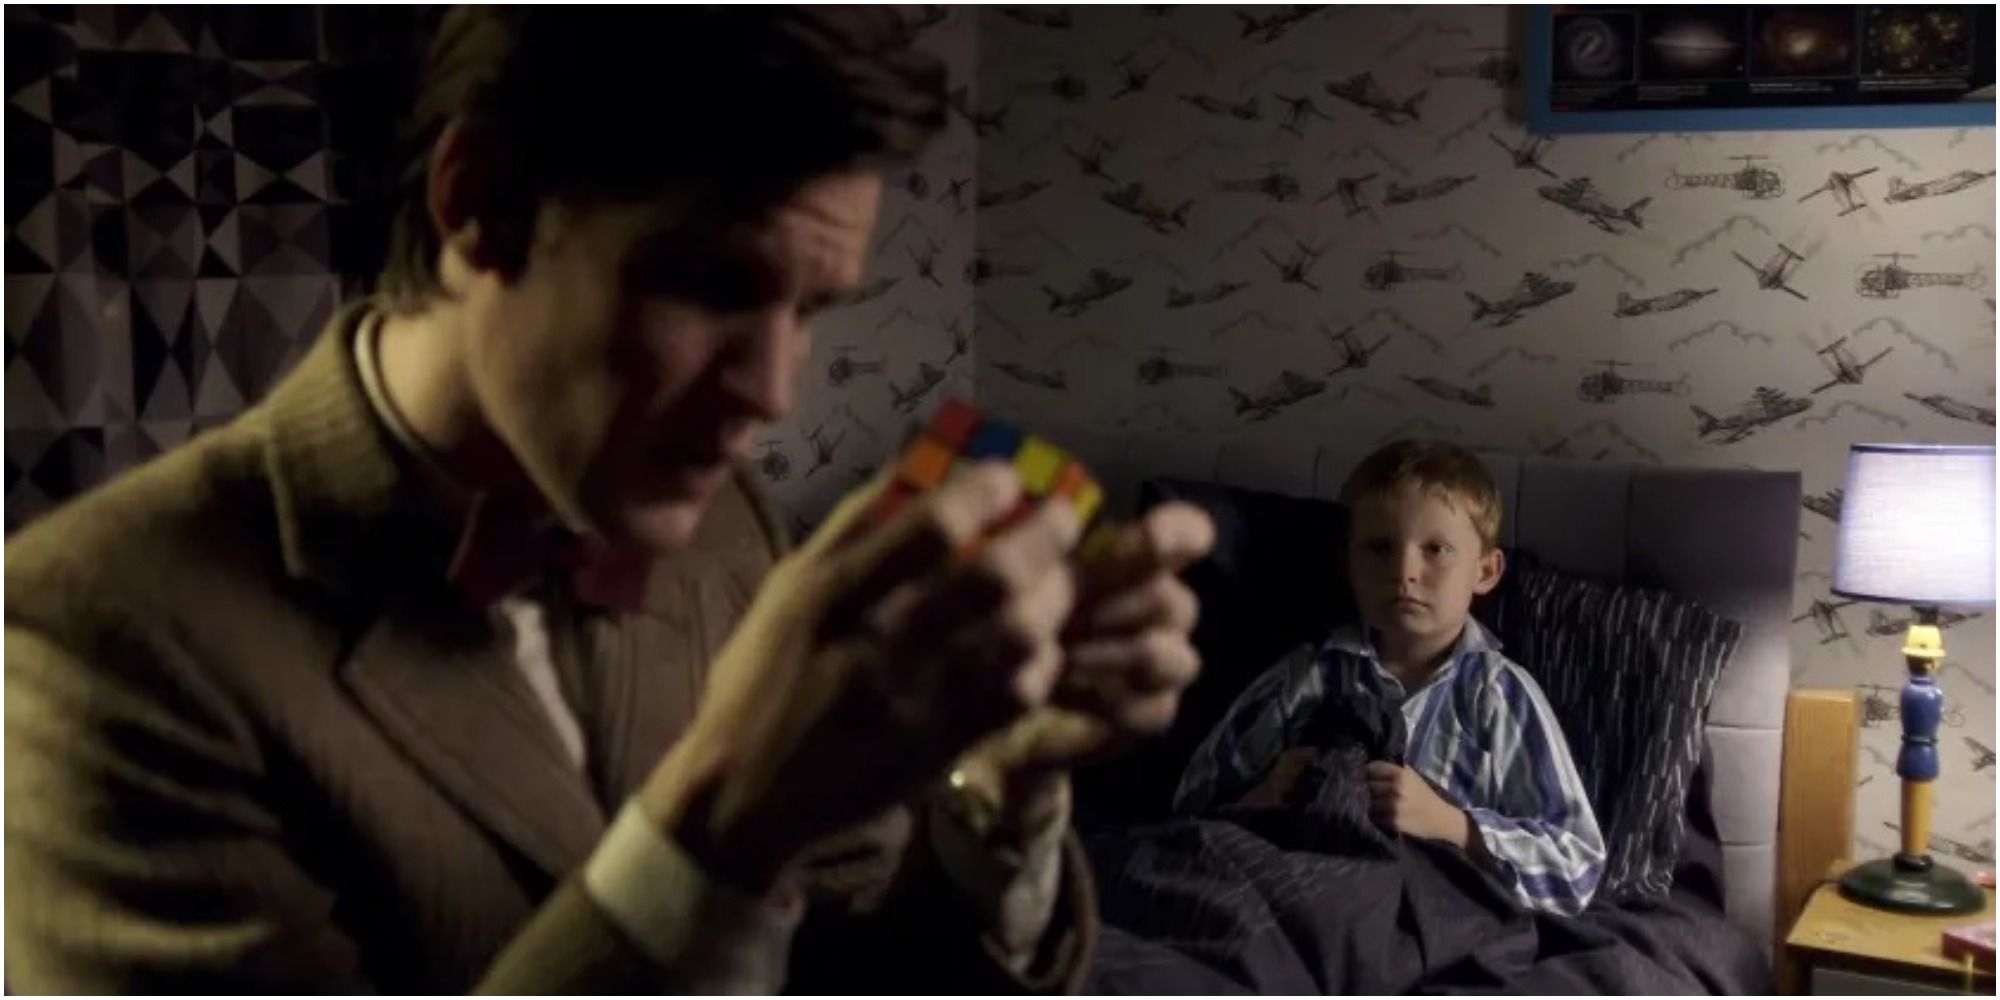 The Eleventh Doctor tries to help a scared child who is sitting in his bed in Doctor Who.